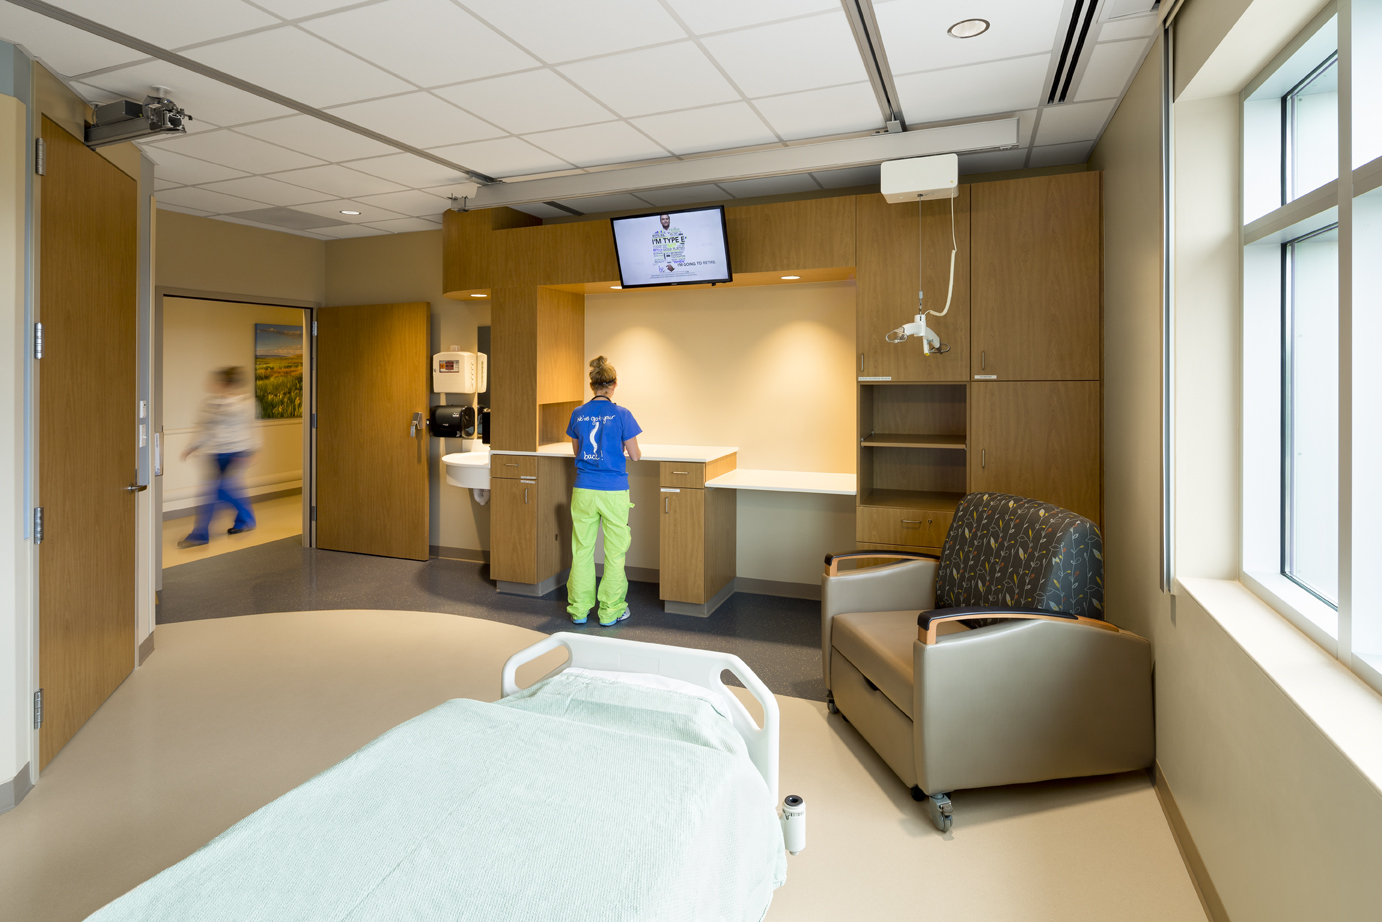 Recent renovations added private patient rooms to Craig Hospital. Photos courtesy of Craig Hospital.